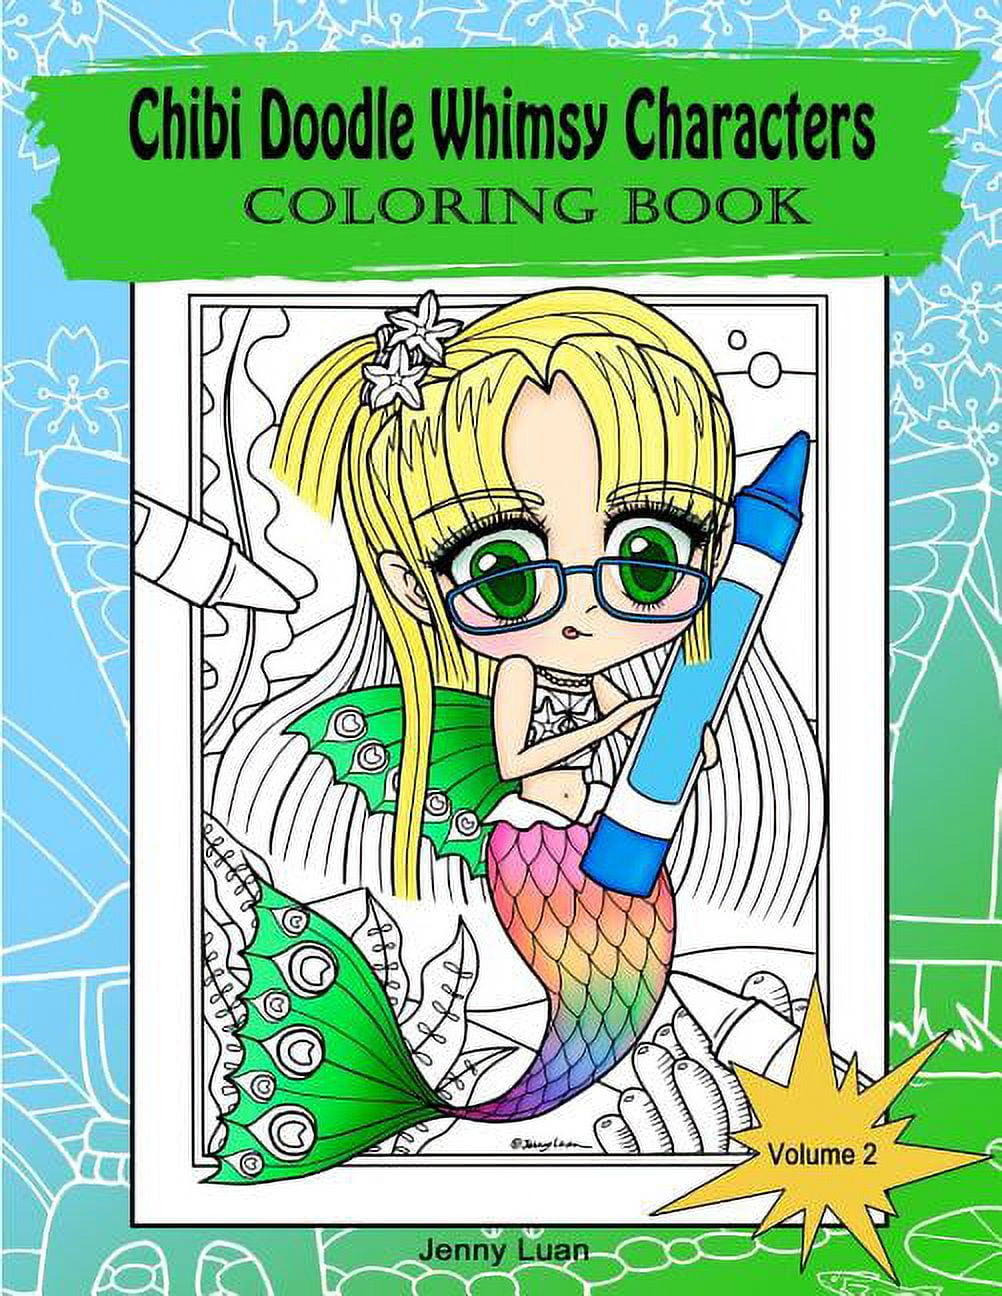 Disney Wish Coloring Book Set for Kids Ages 4-8 - Bundle with Disney Wish Coloring Book, Wish Imagine Ink Book, Wish Play Pack, Stickers, More 